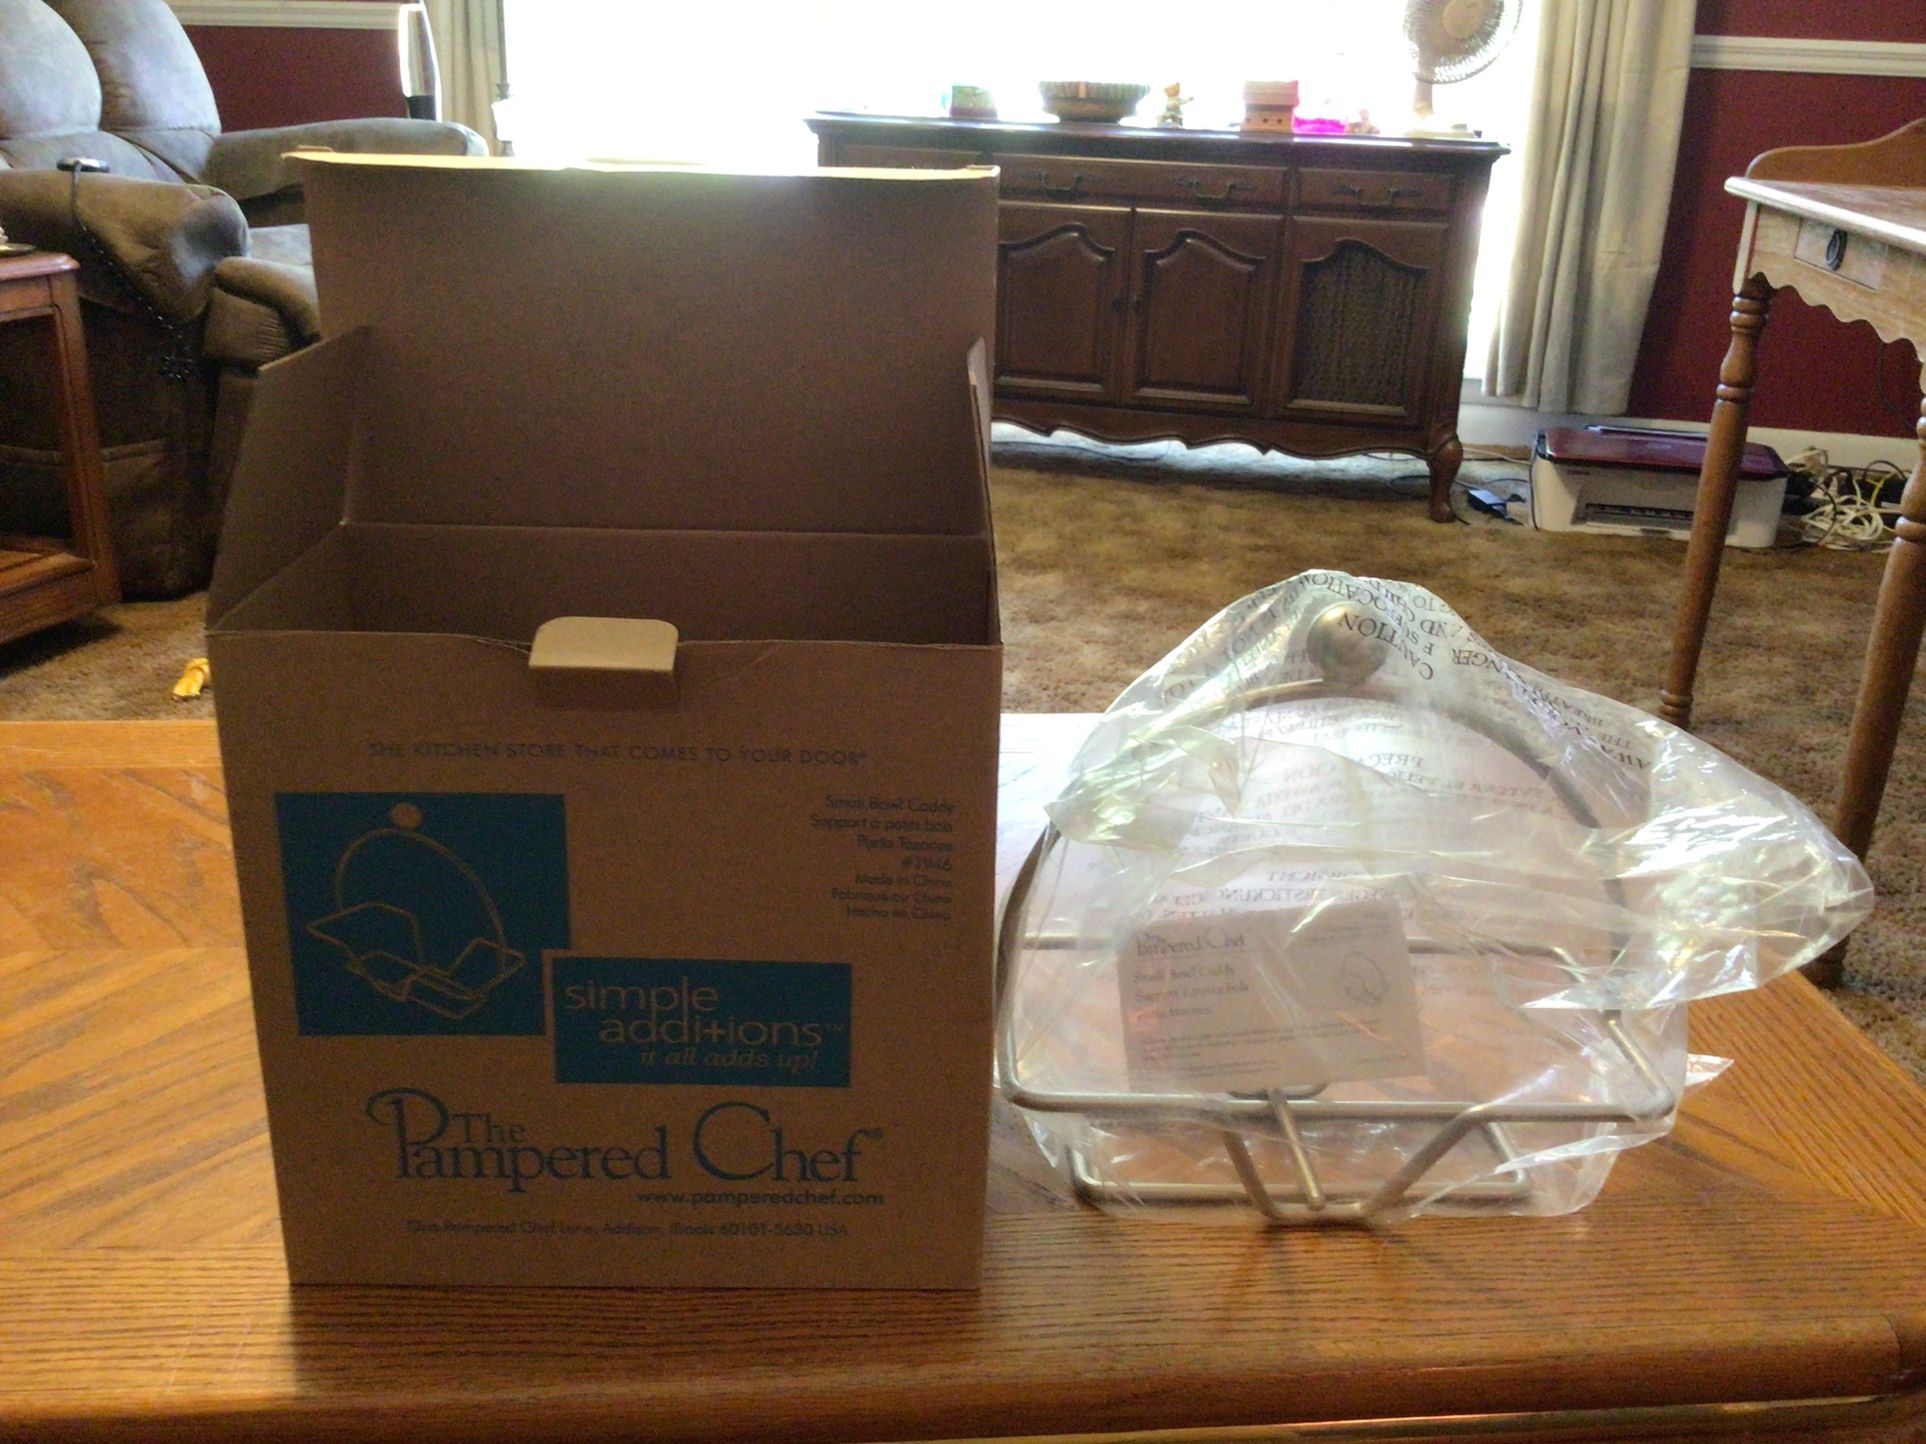 The Pampered Chef Simple Additions bowl holder new still in box